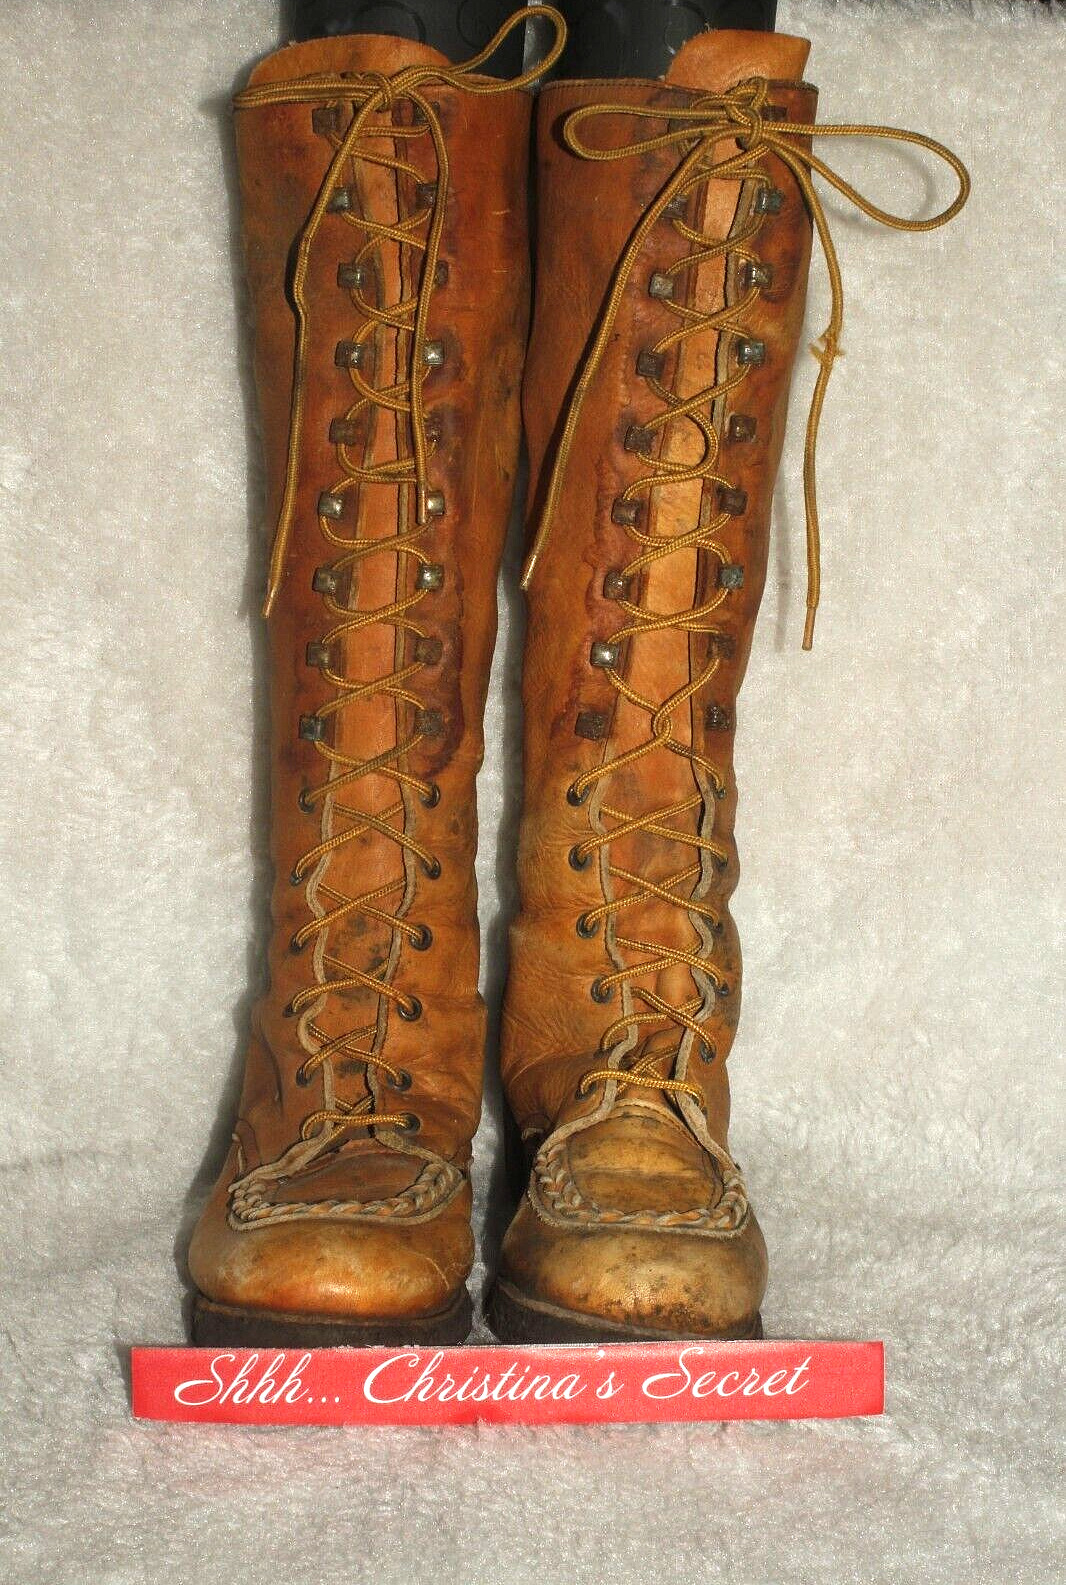 VINTAGE ZODIAC 70s Womens Knee High Boots Tan Leather Distressed 7.5 N NARROW